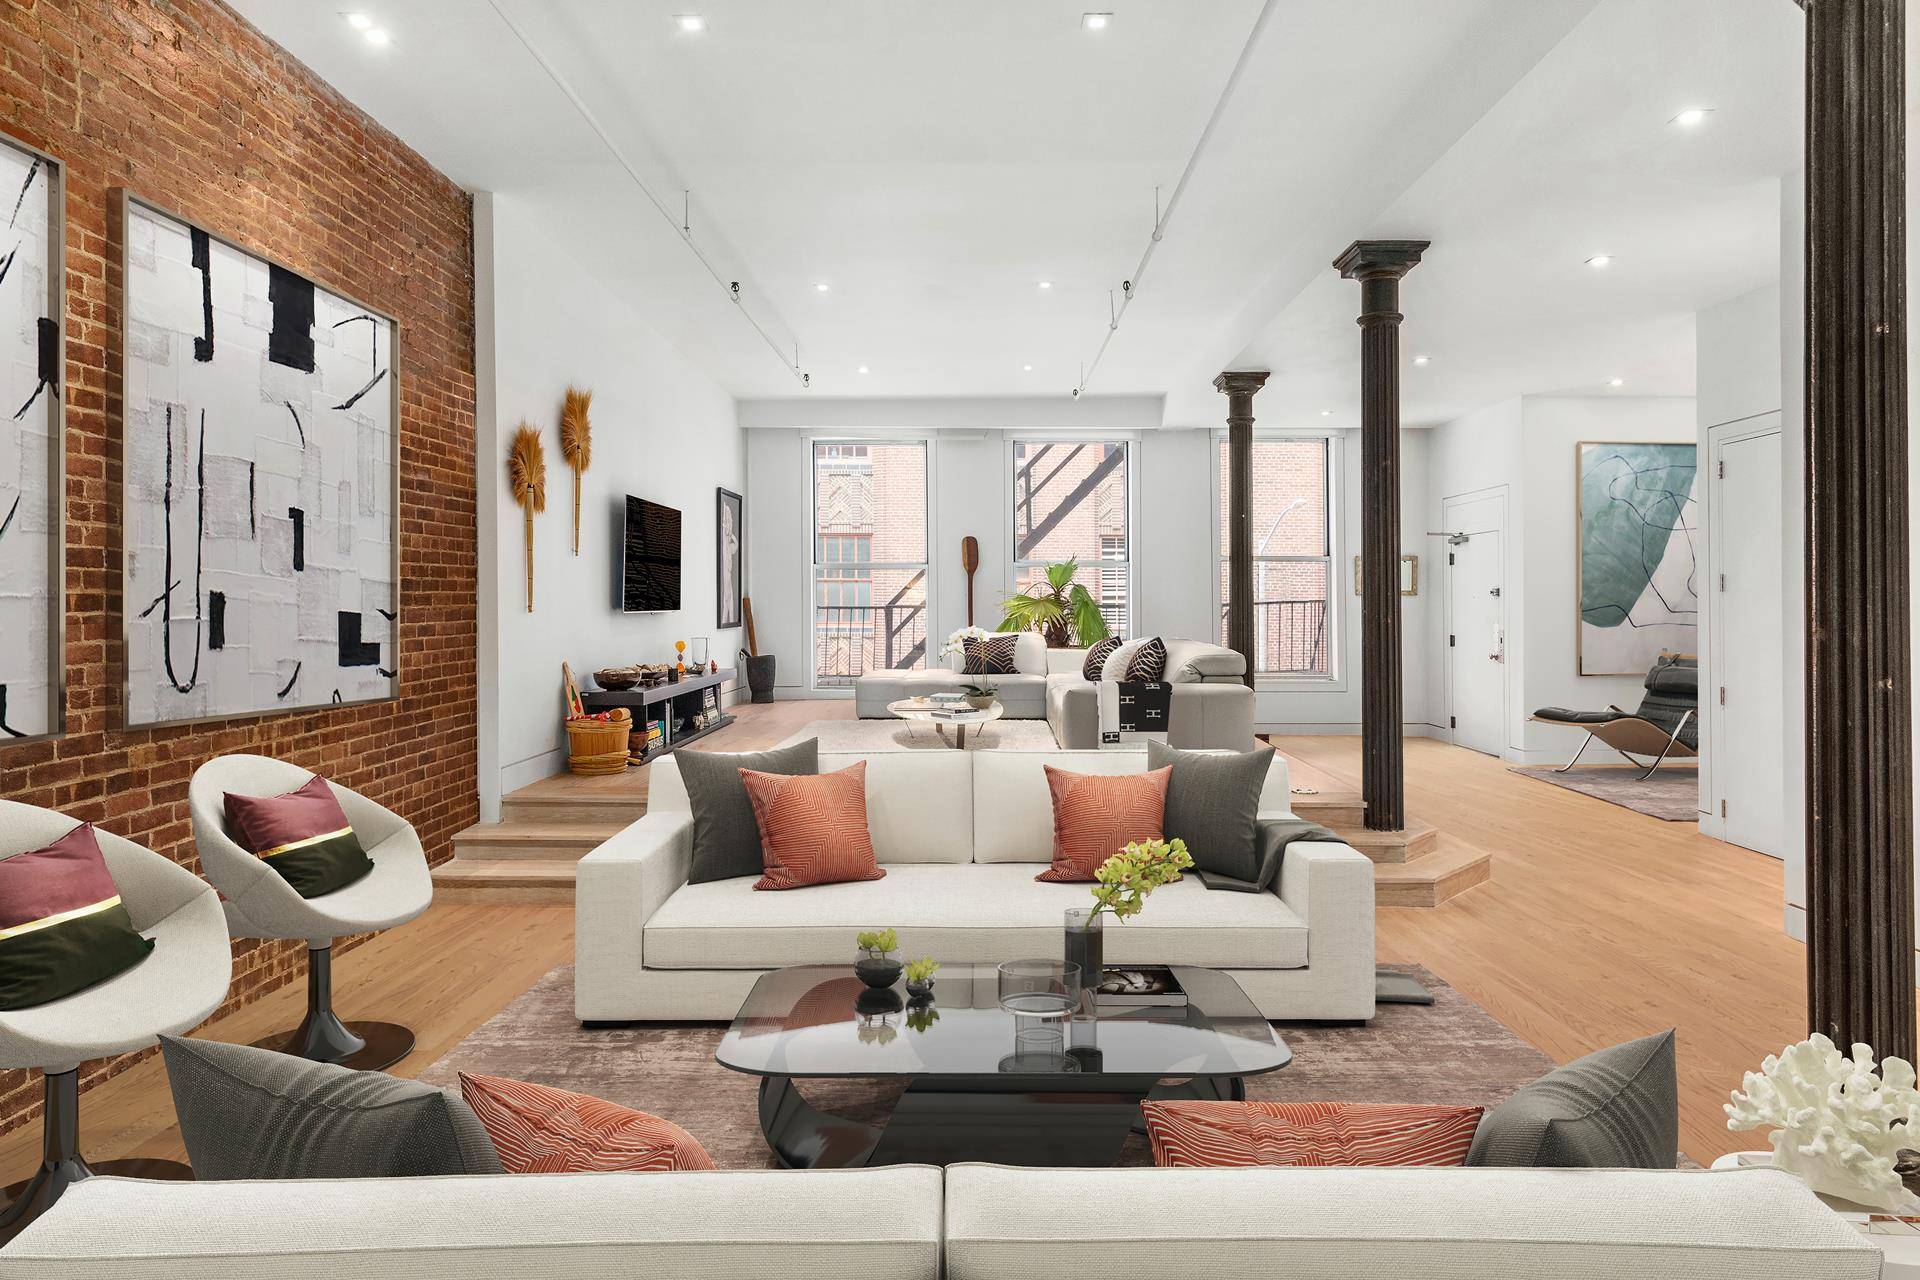 Meticulously renovated 1880 PreWar full floor sprawling loft on the intimate street of Thomas in TriBeca, conveniently located between W.